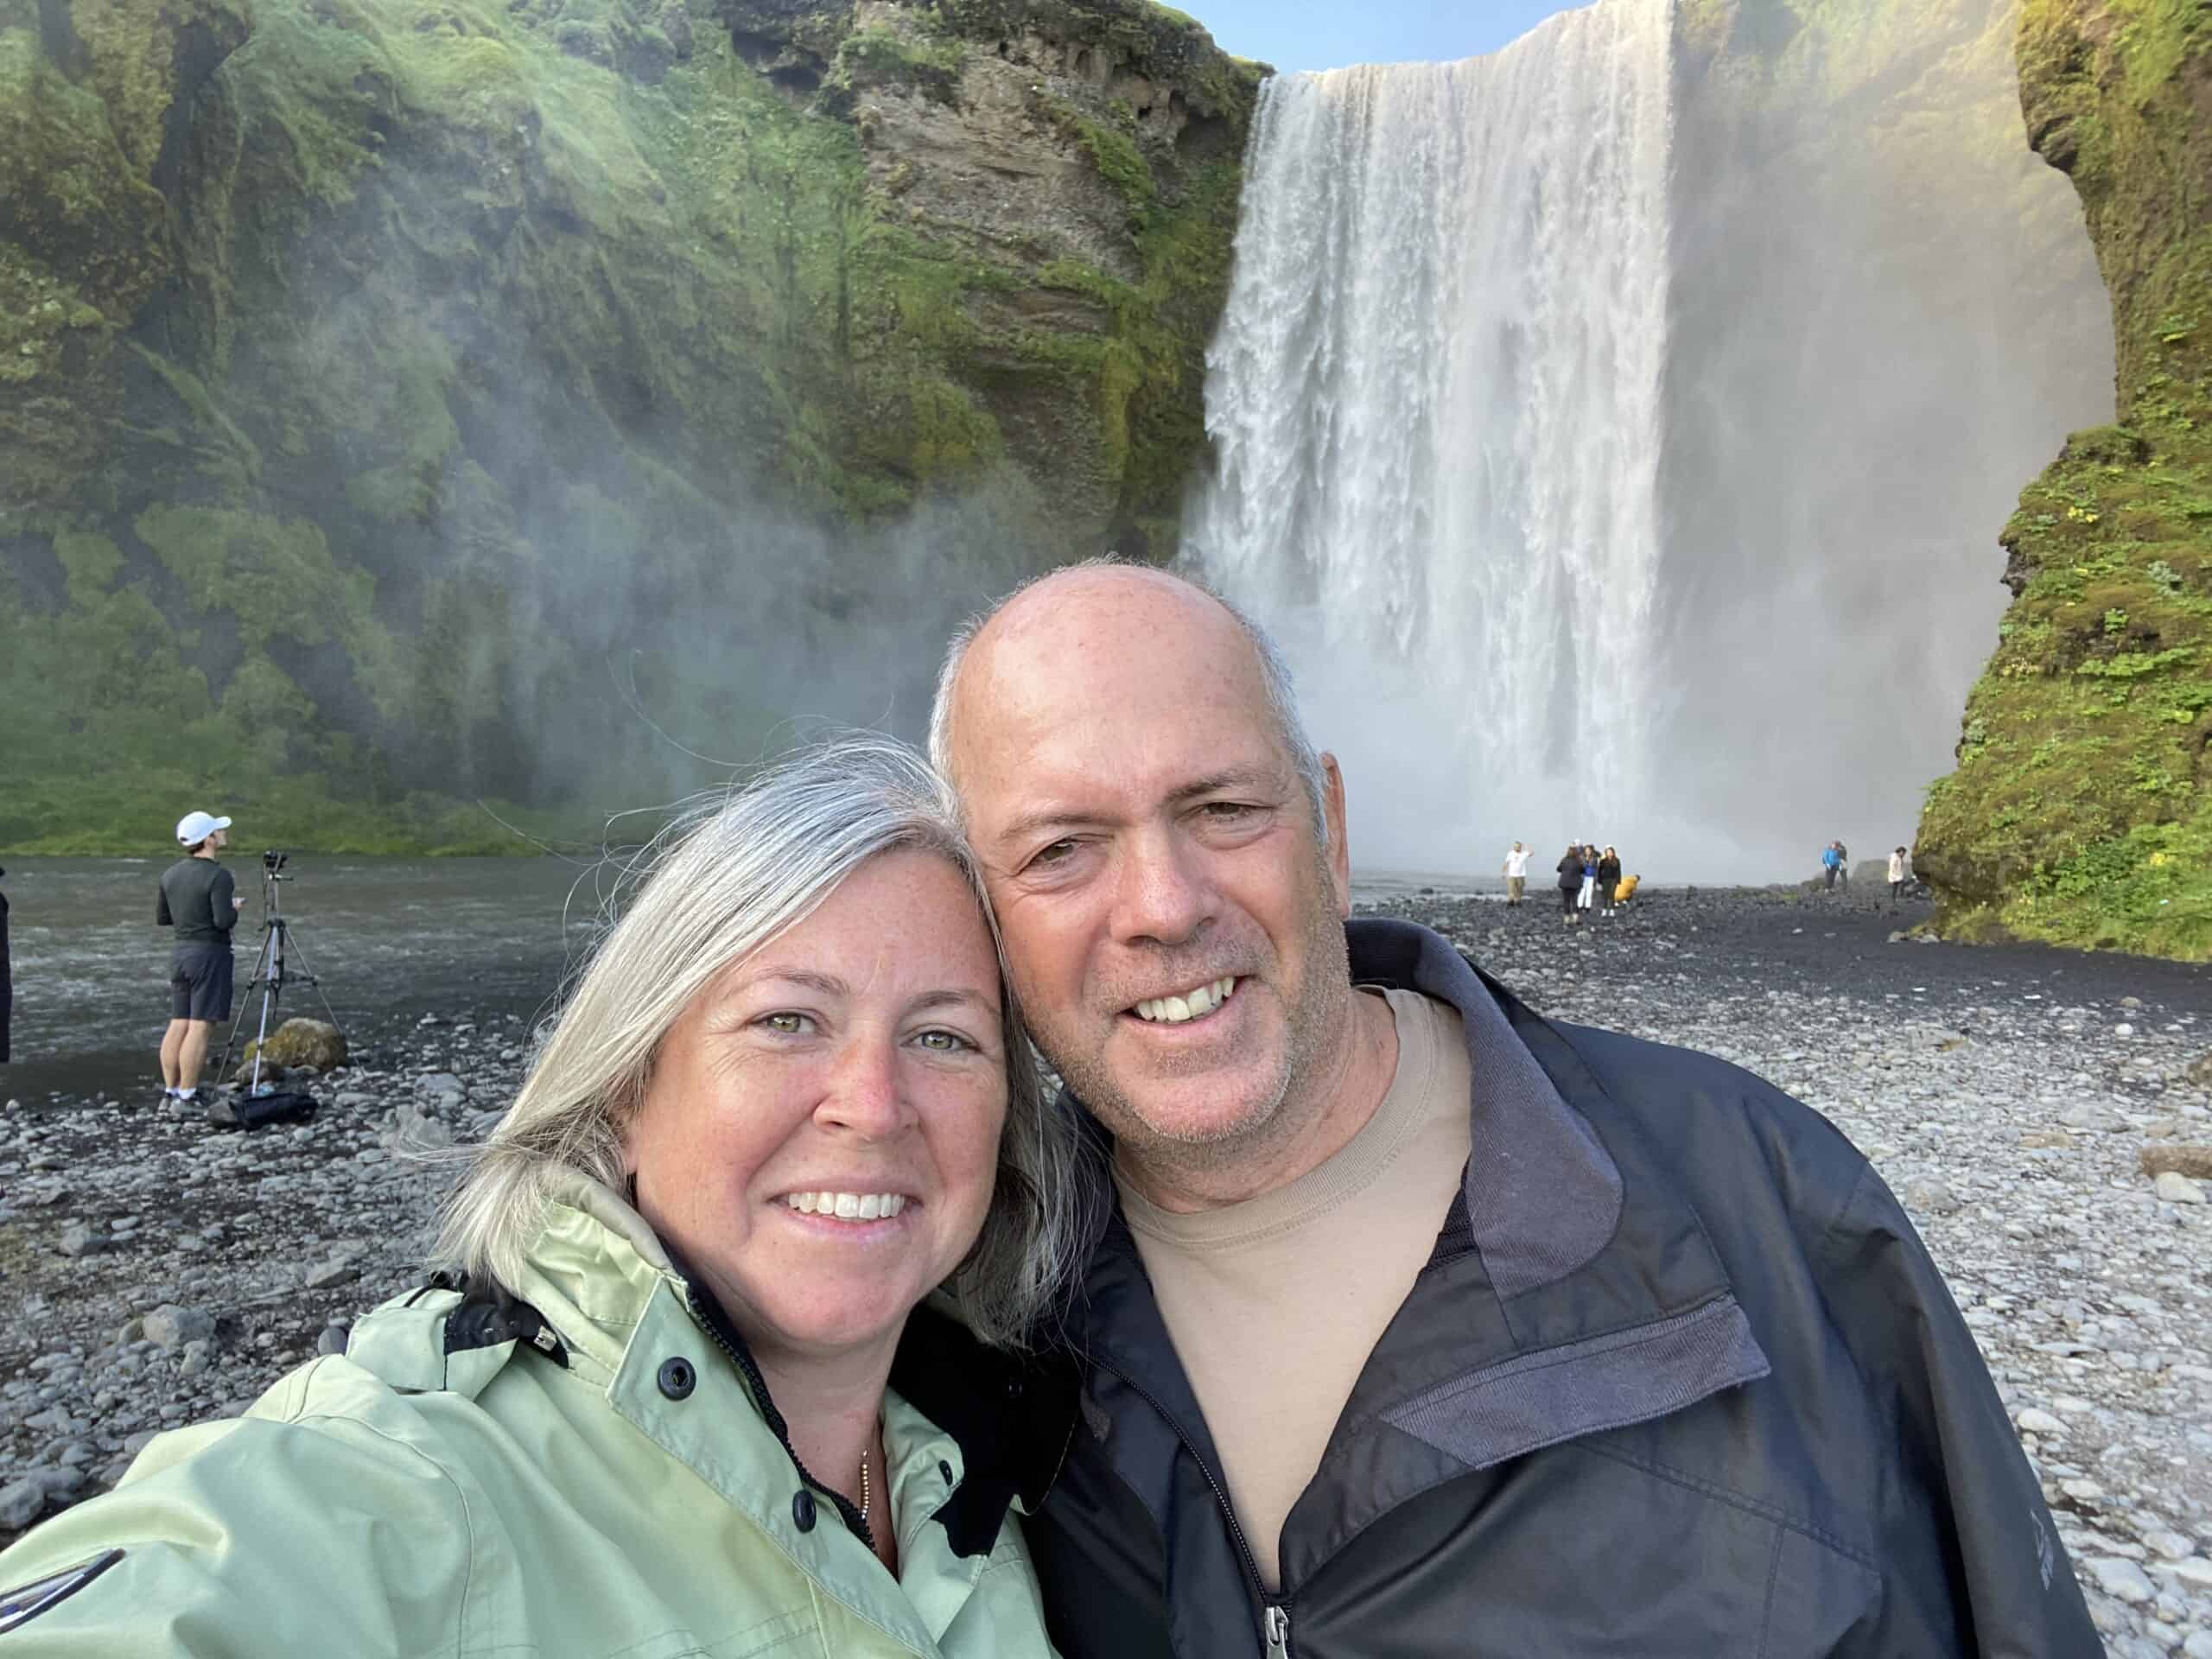 Our selfie in Iceland